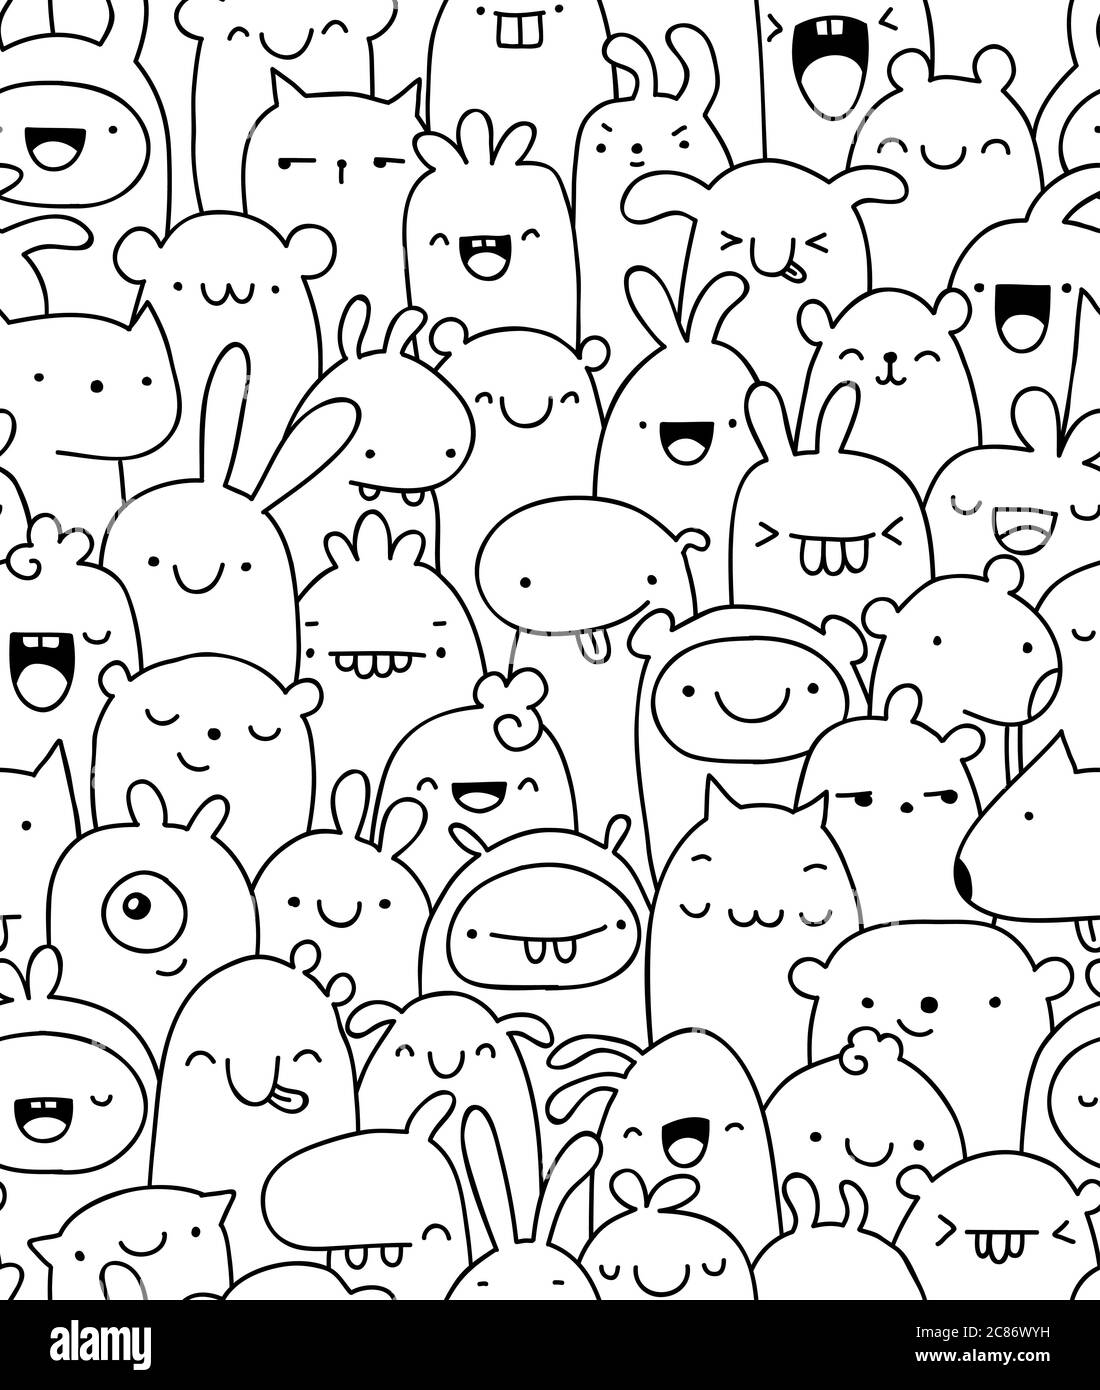 Cute and fun pattern with various imaginary characters Stock Photo